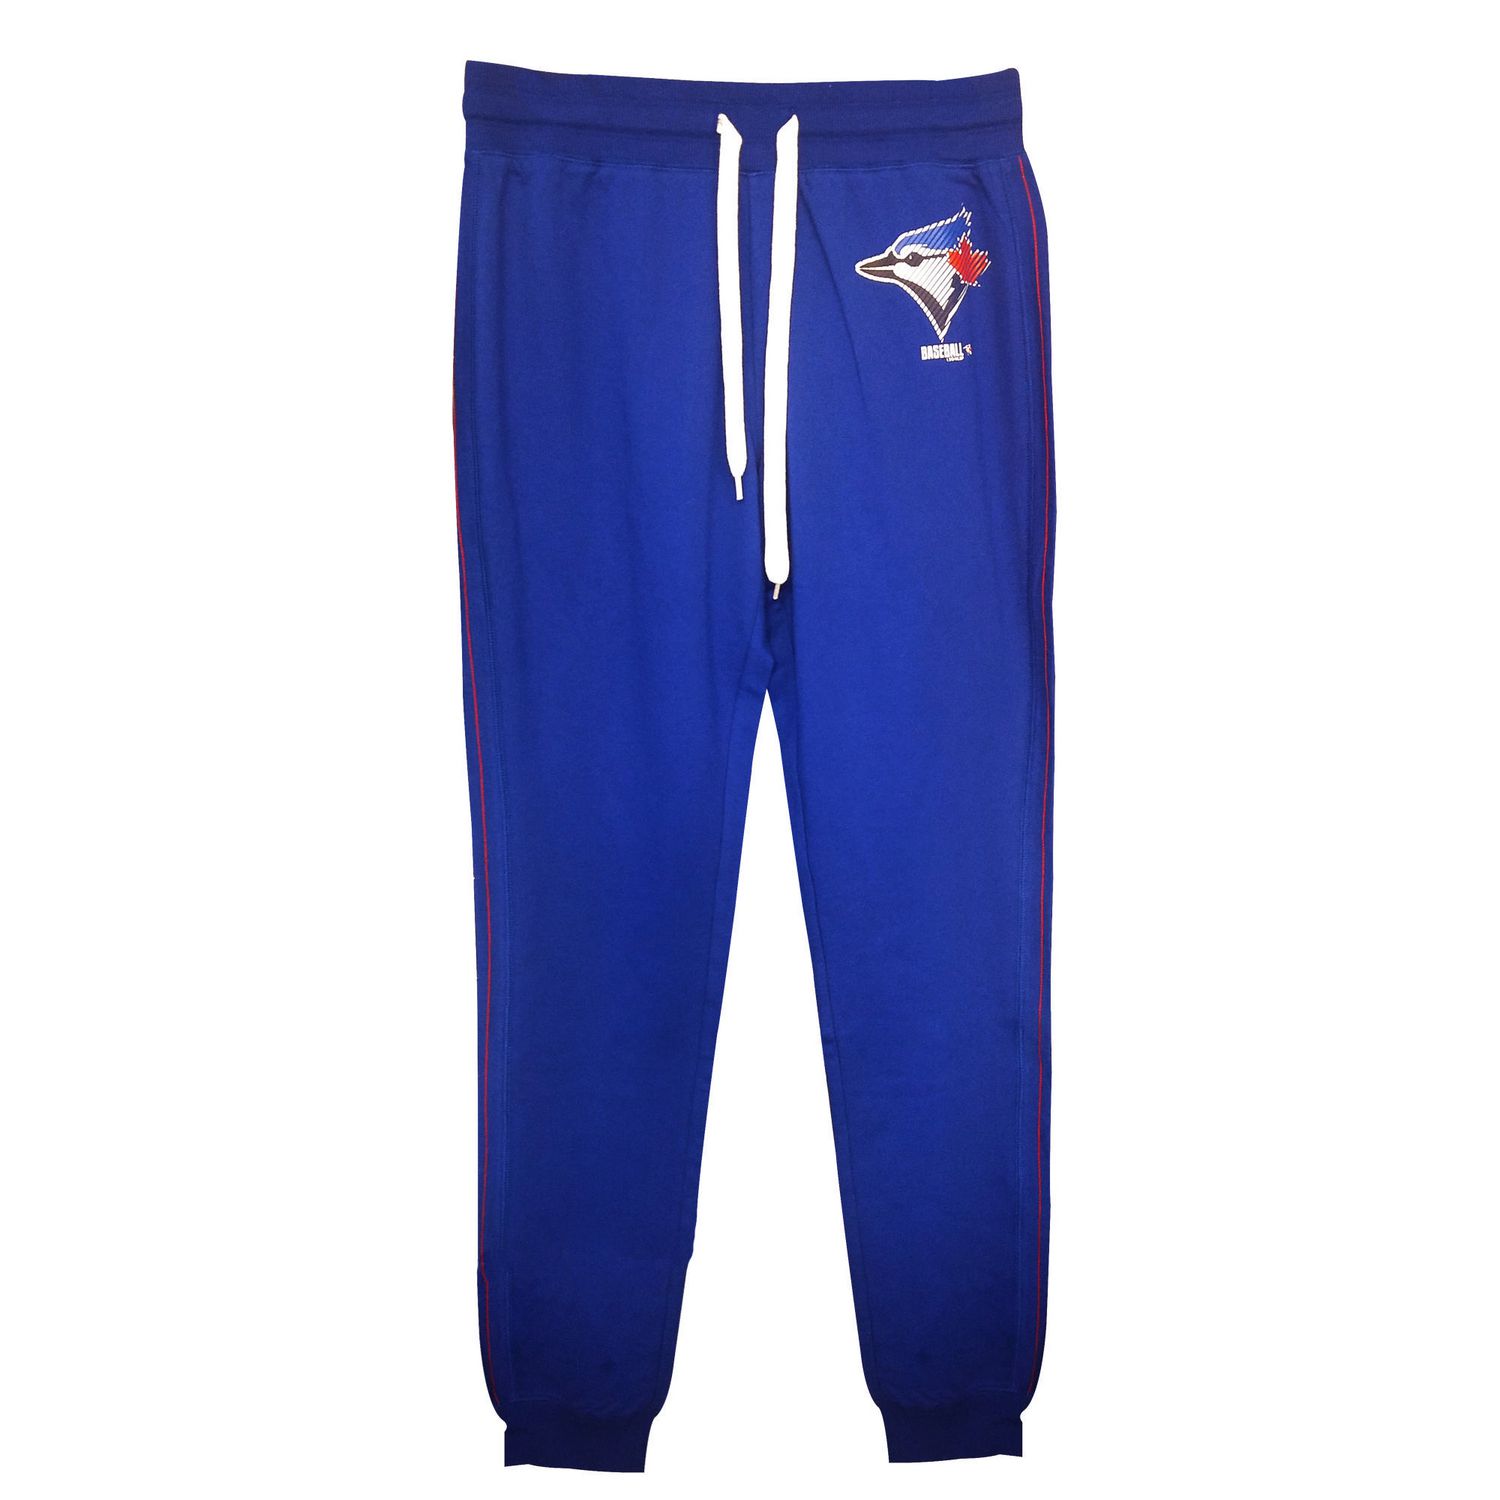 Toronto Blue Jays on X: The boys have the Power of the Pants